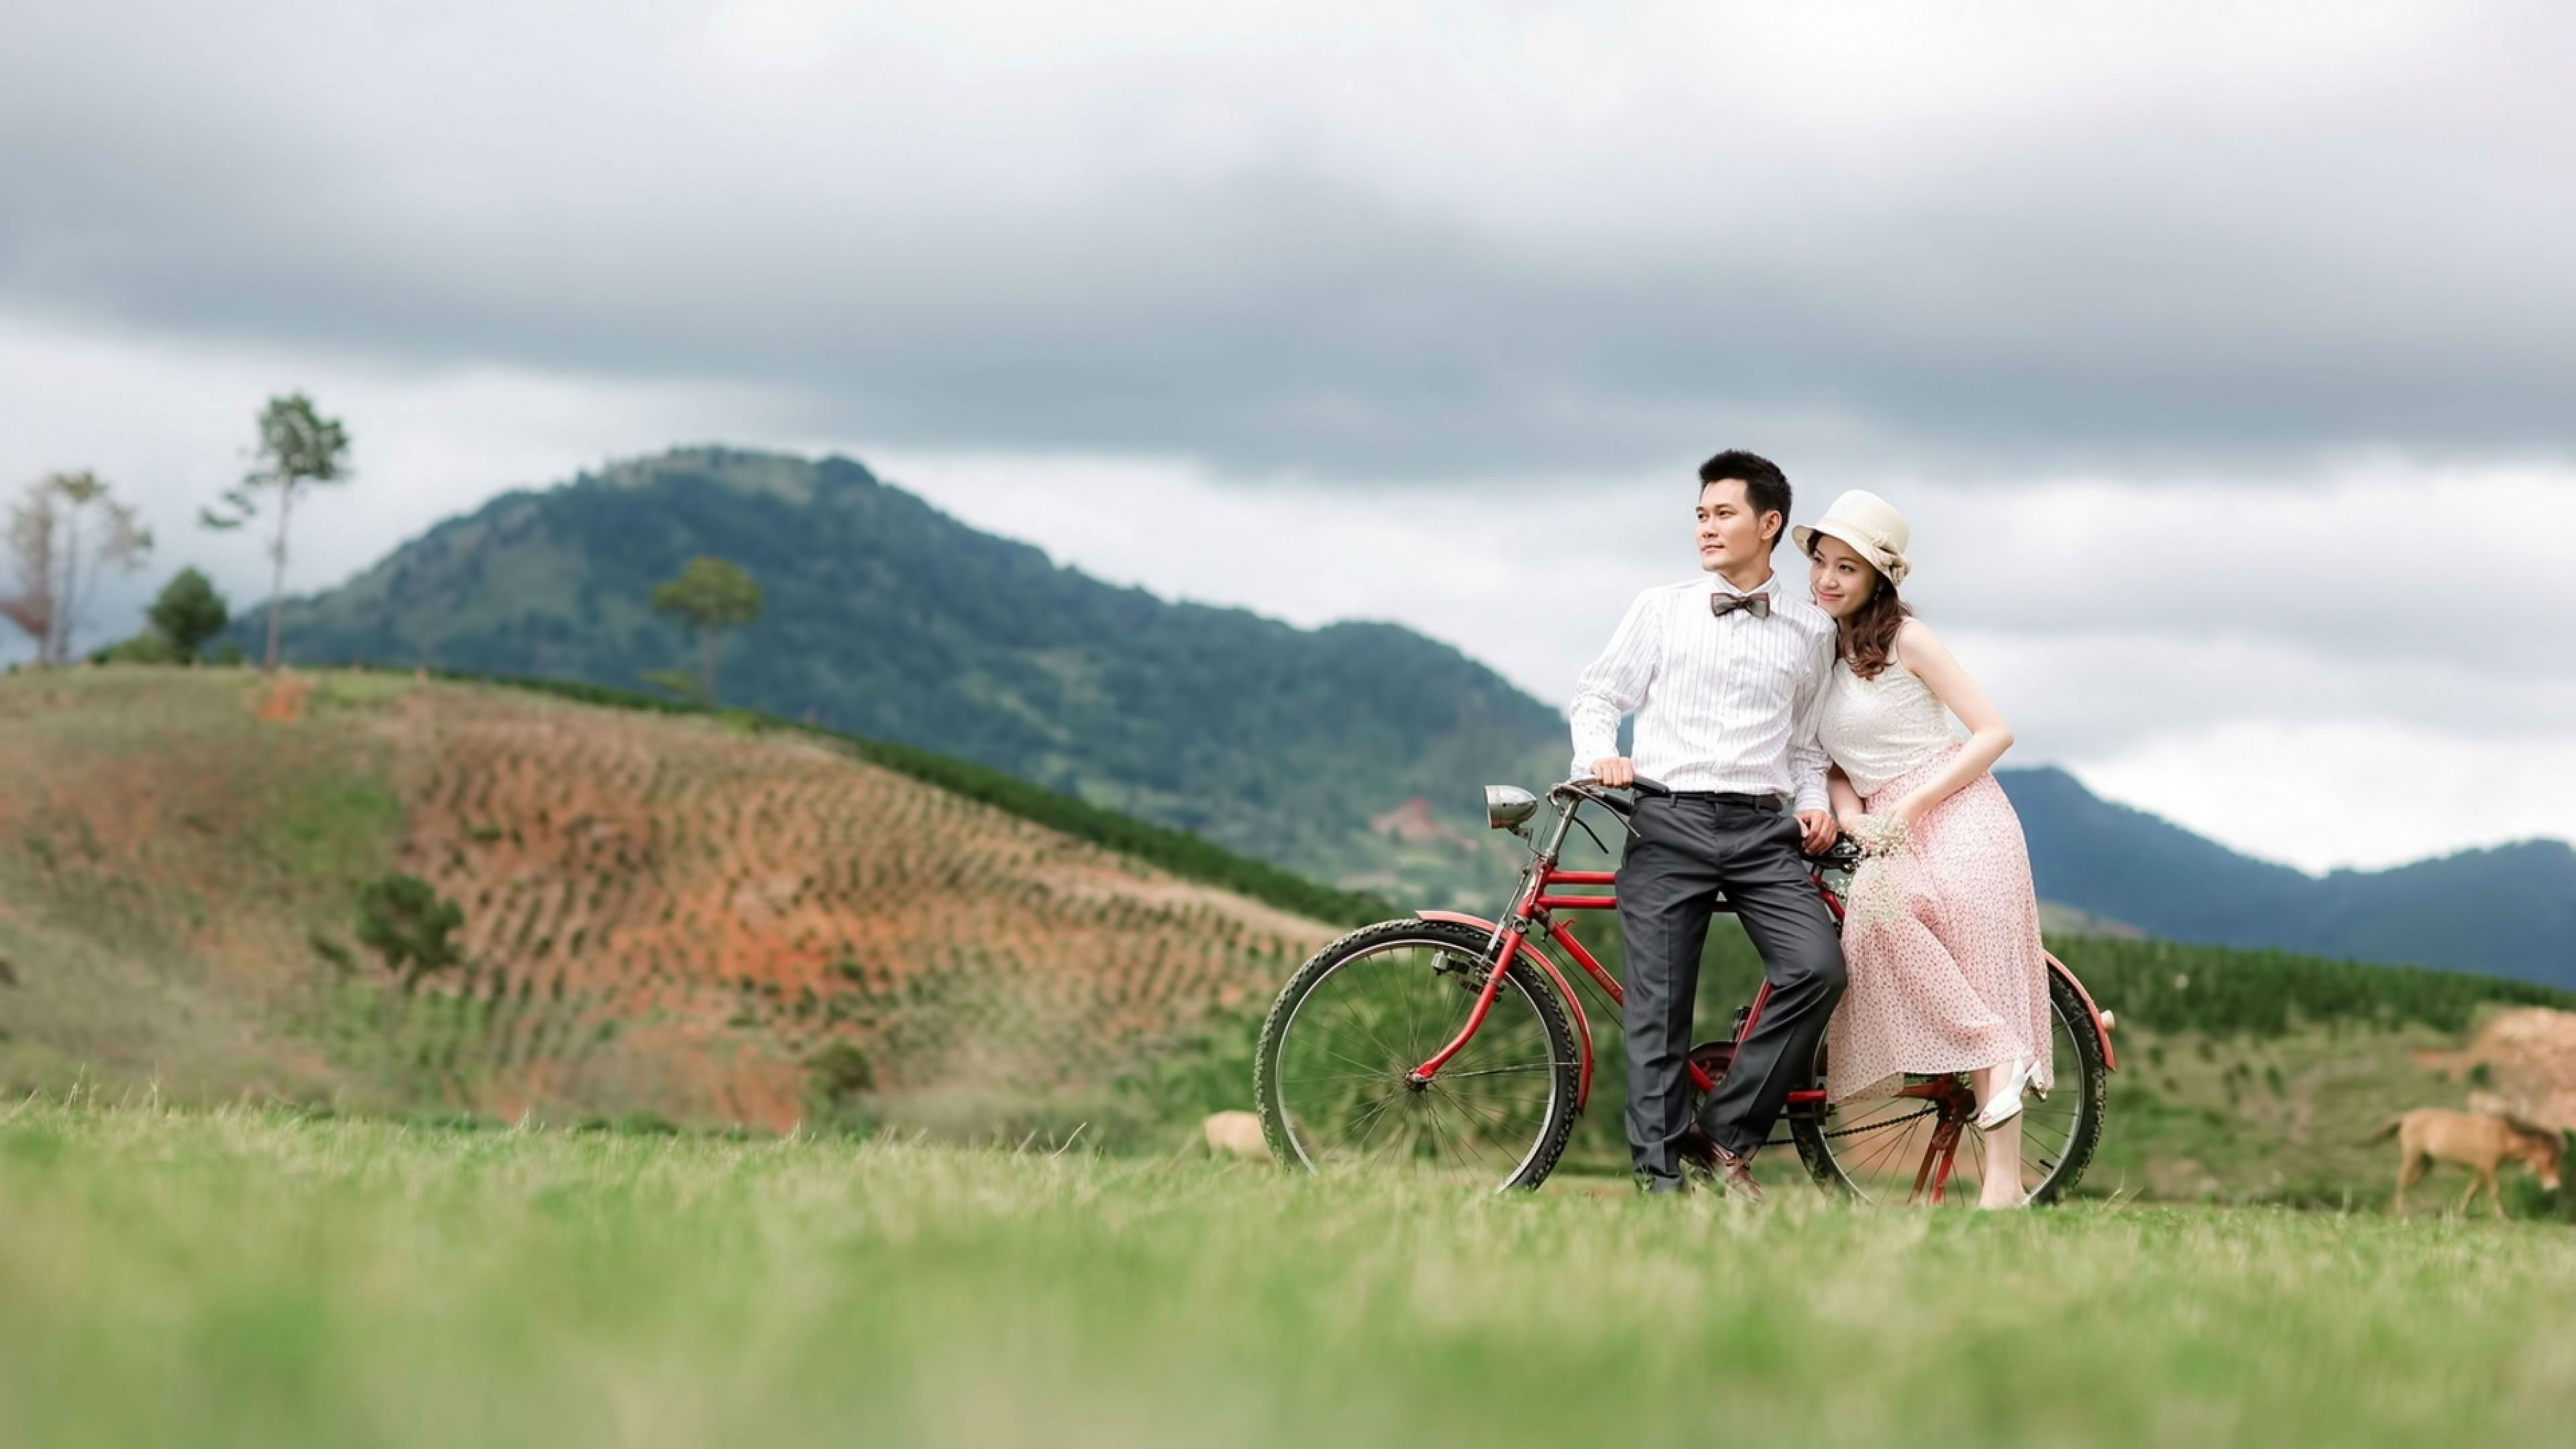 Love Couple Relax On Cycle